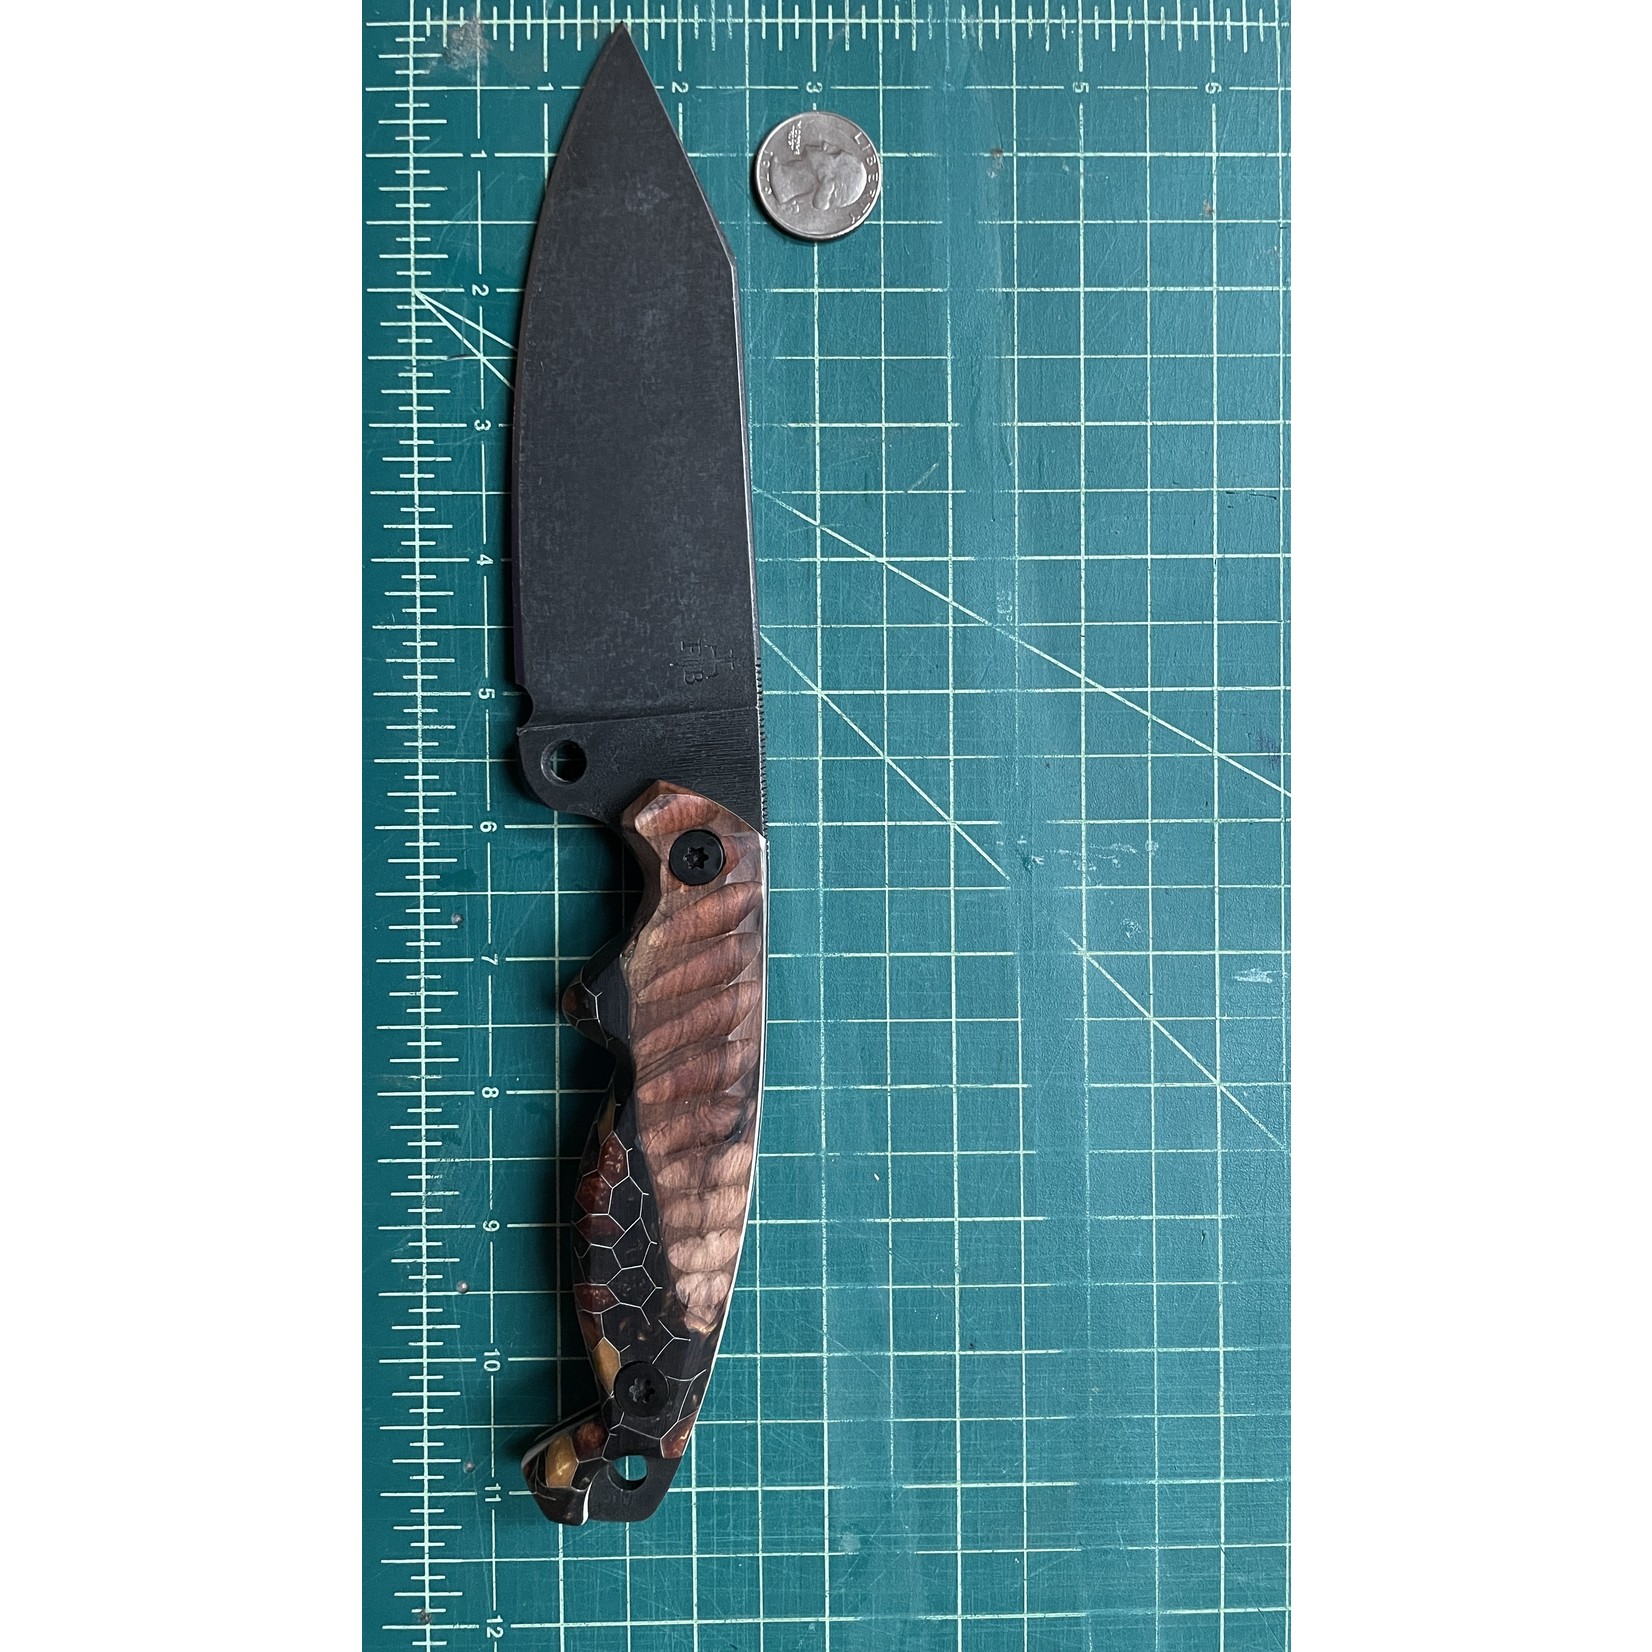 Freebooter Blades Freebooter 1095 & Whiskey Gold Epoxy / Burl Scales Overwatch